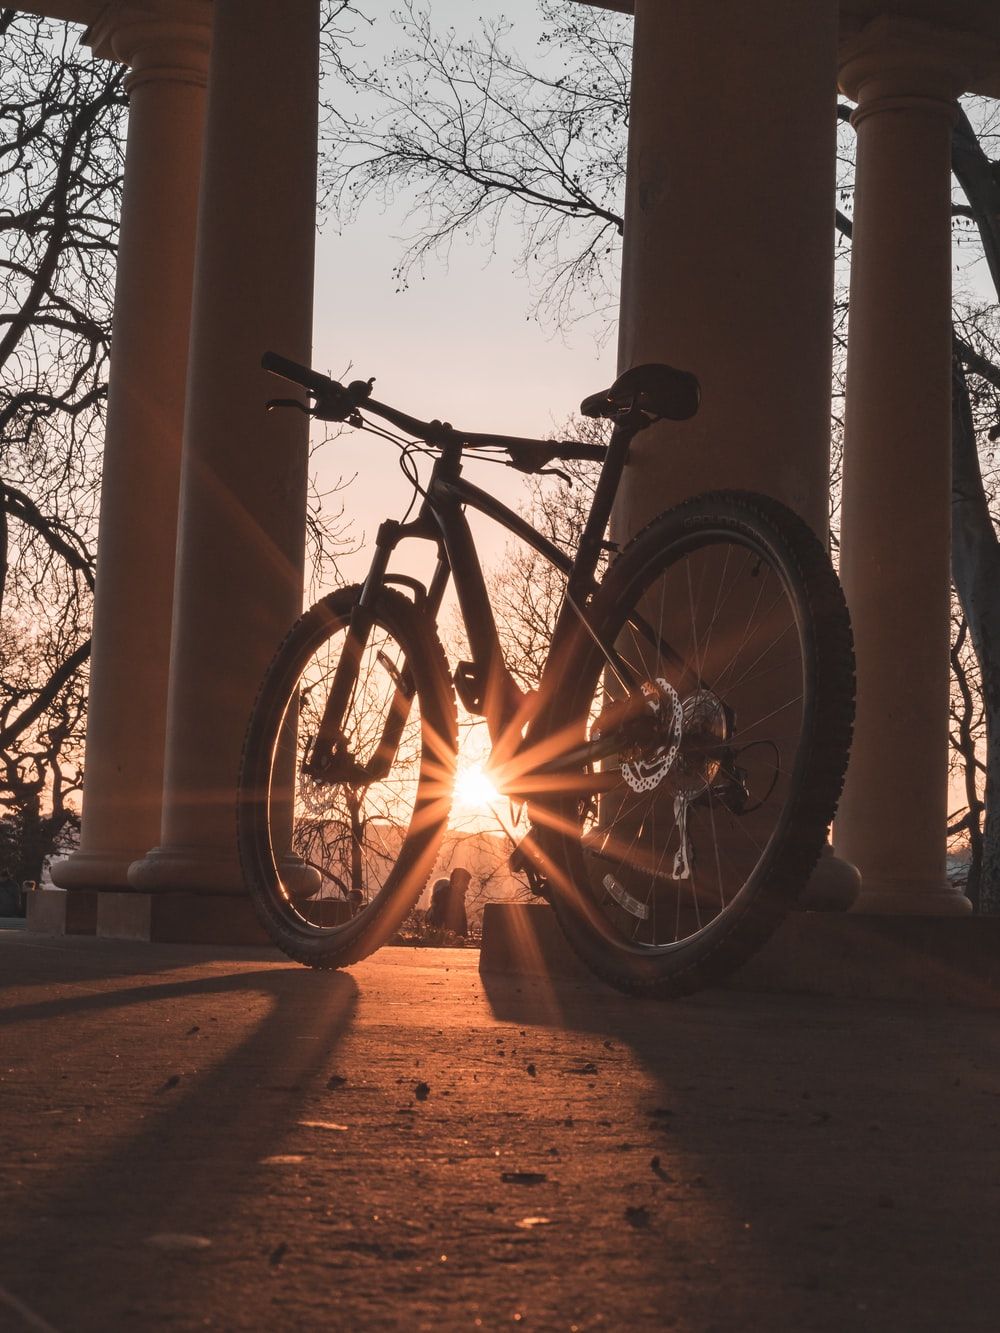 Best Bicycle Picture [HD]. Download Free Image